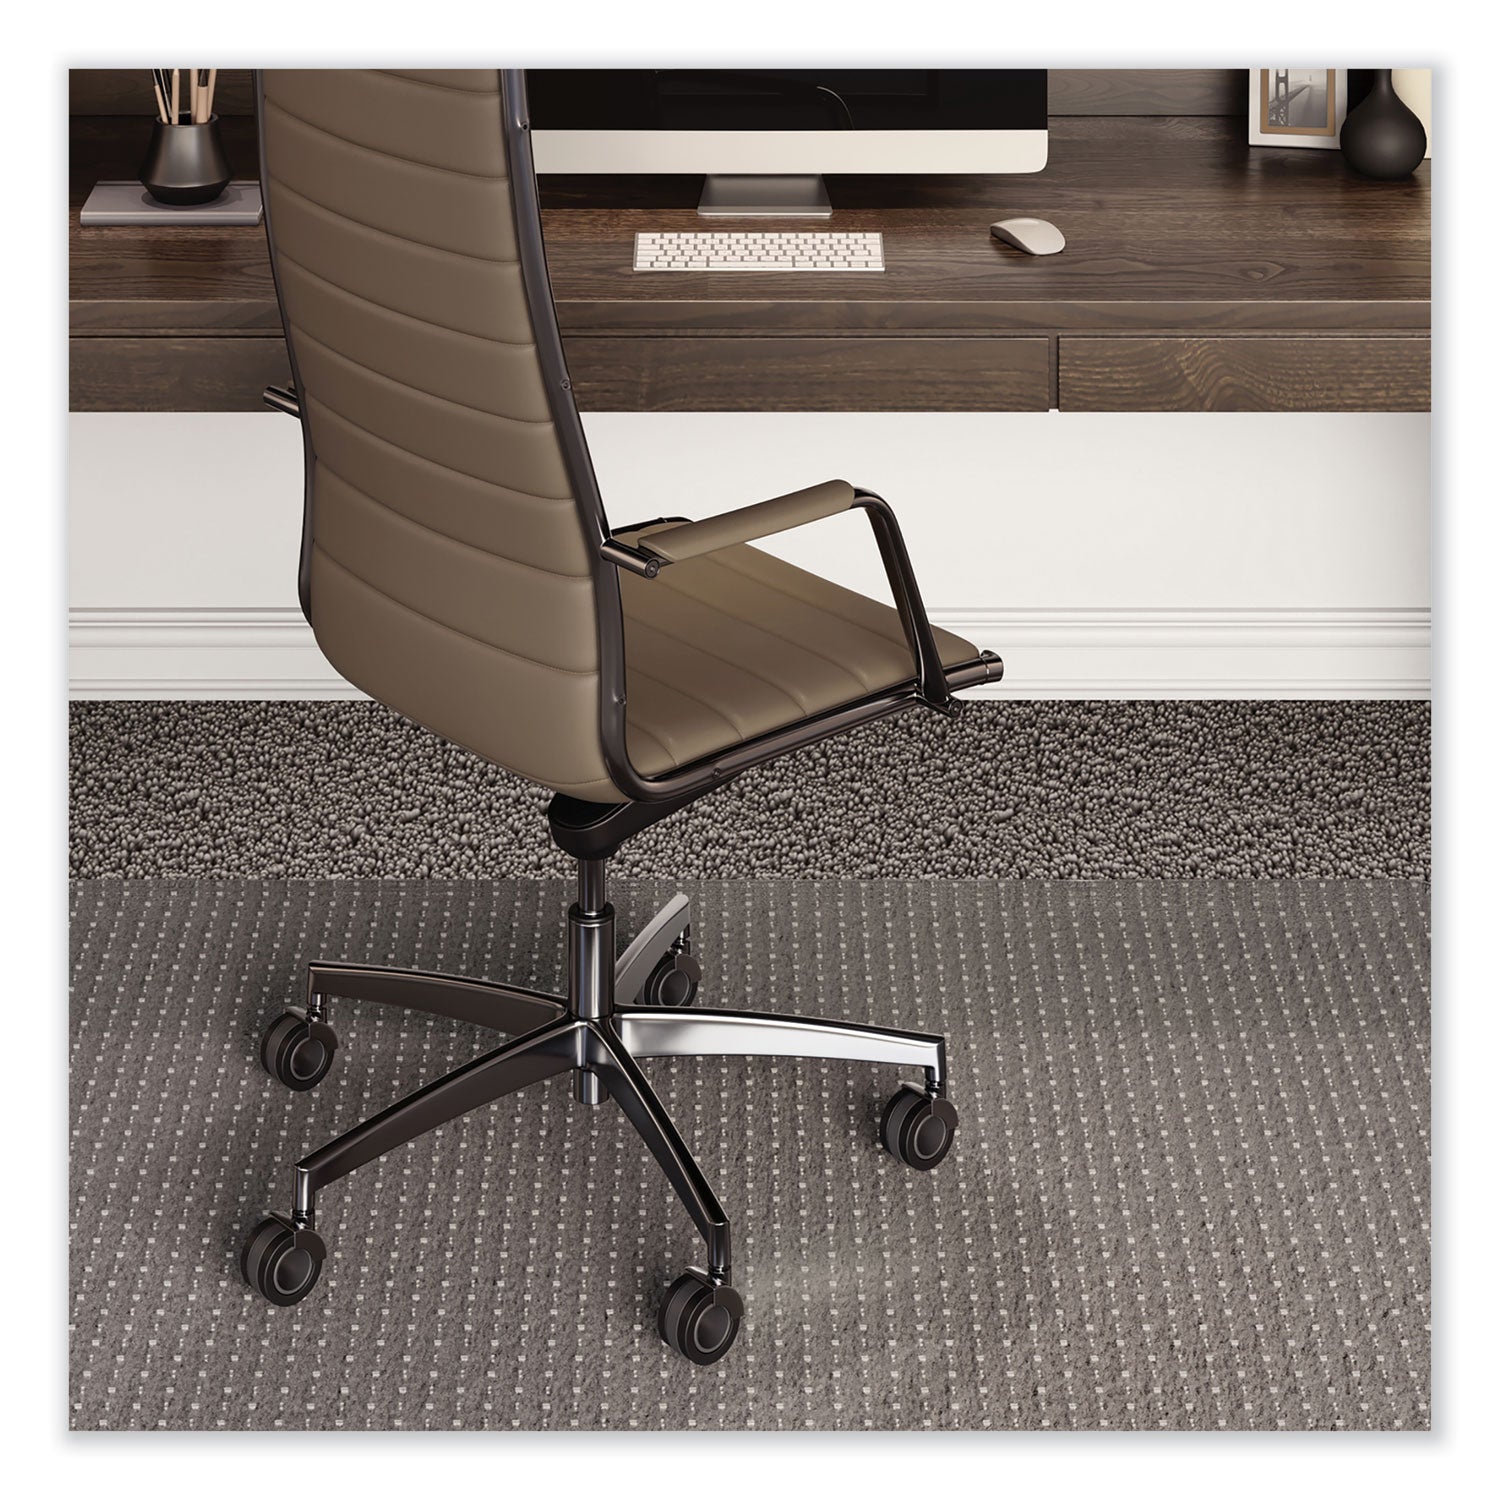 everlife-chair-mat-for-extra-high-pile-carpet-72-x-96-clear-ships-in-7-10-business-days_esr124918 - 5